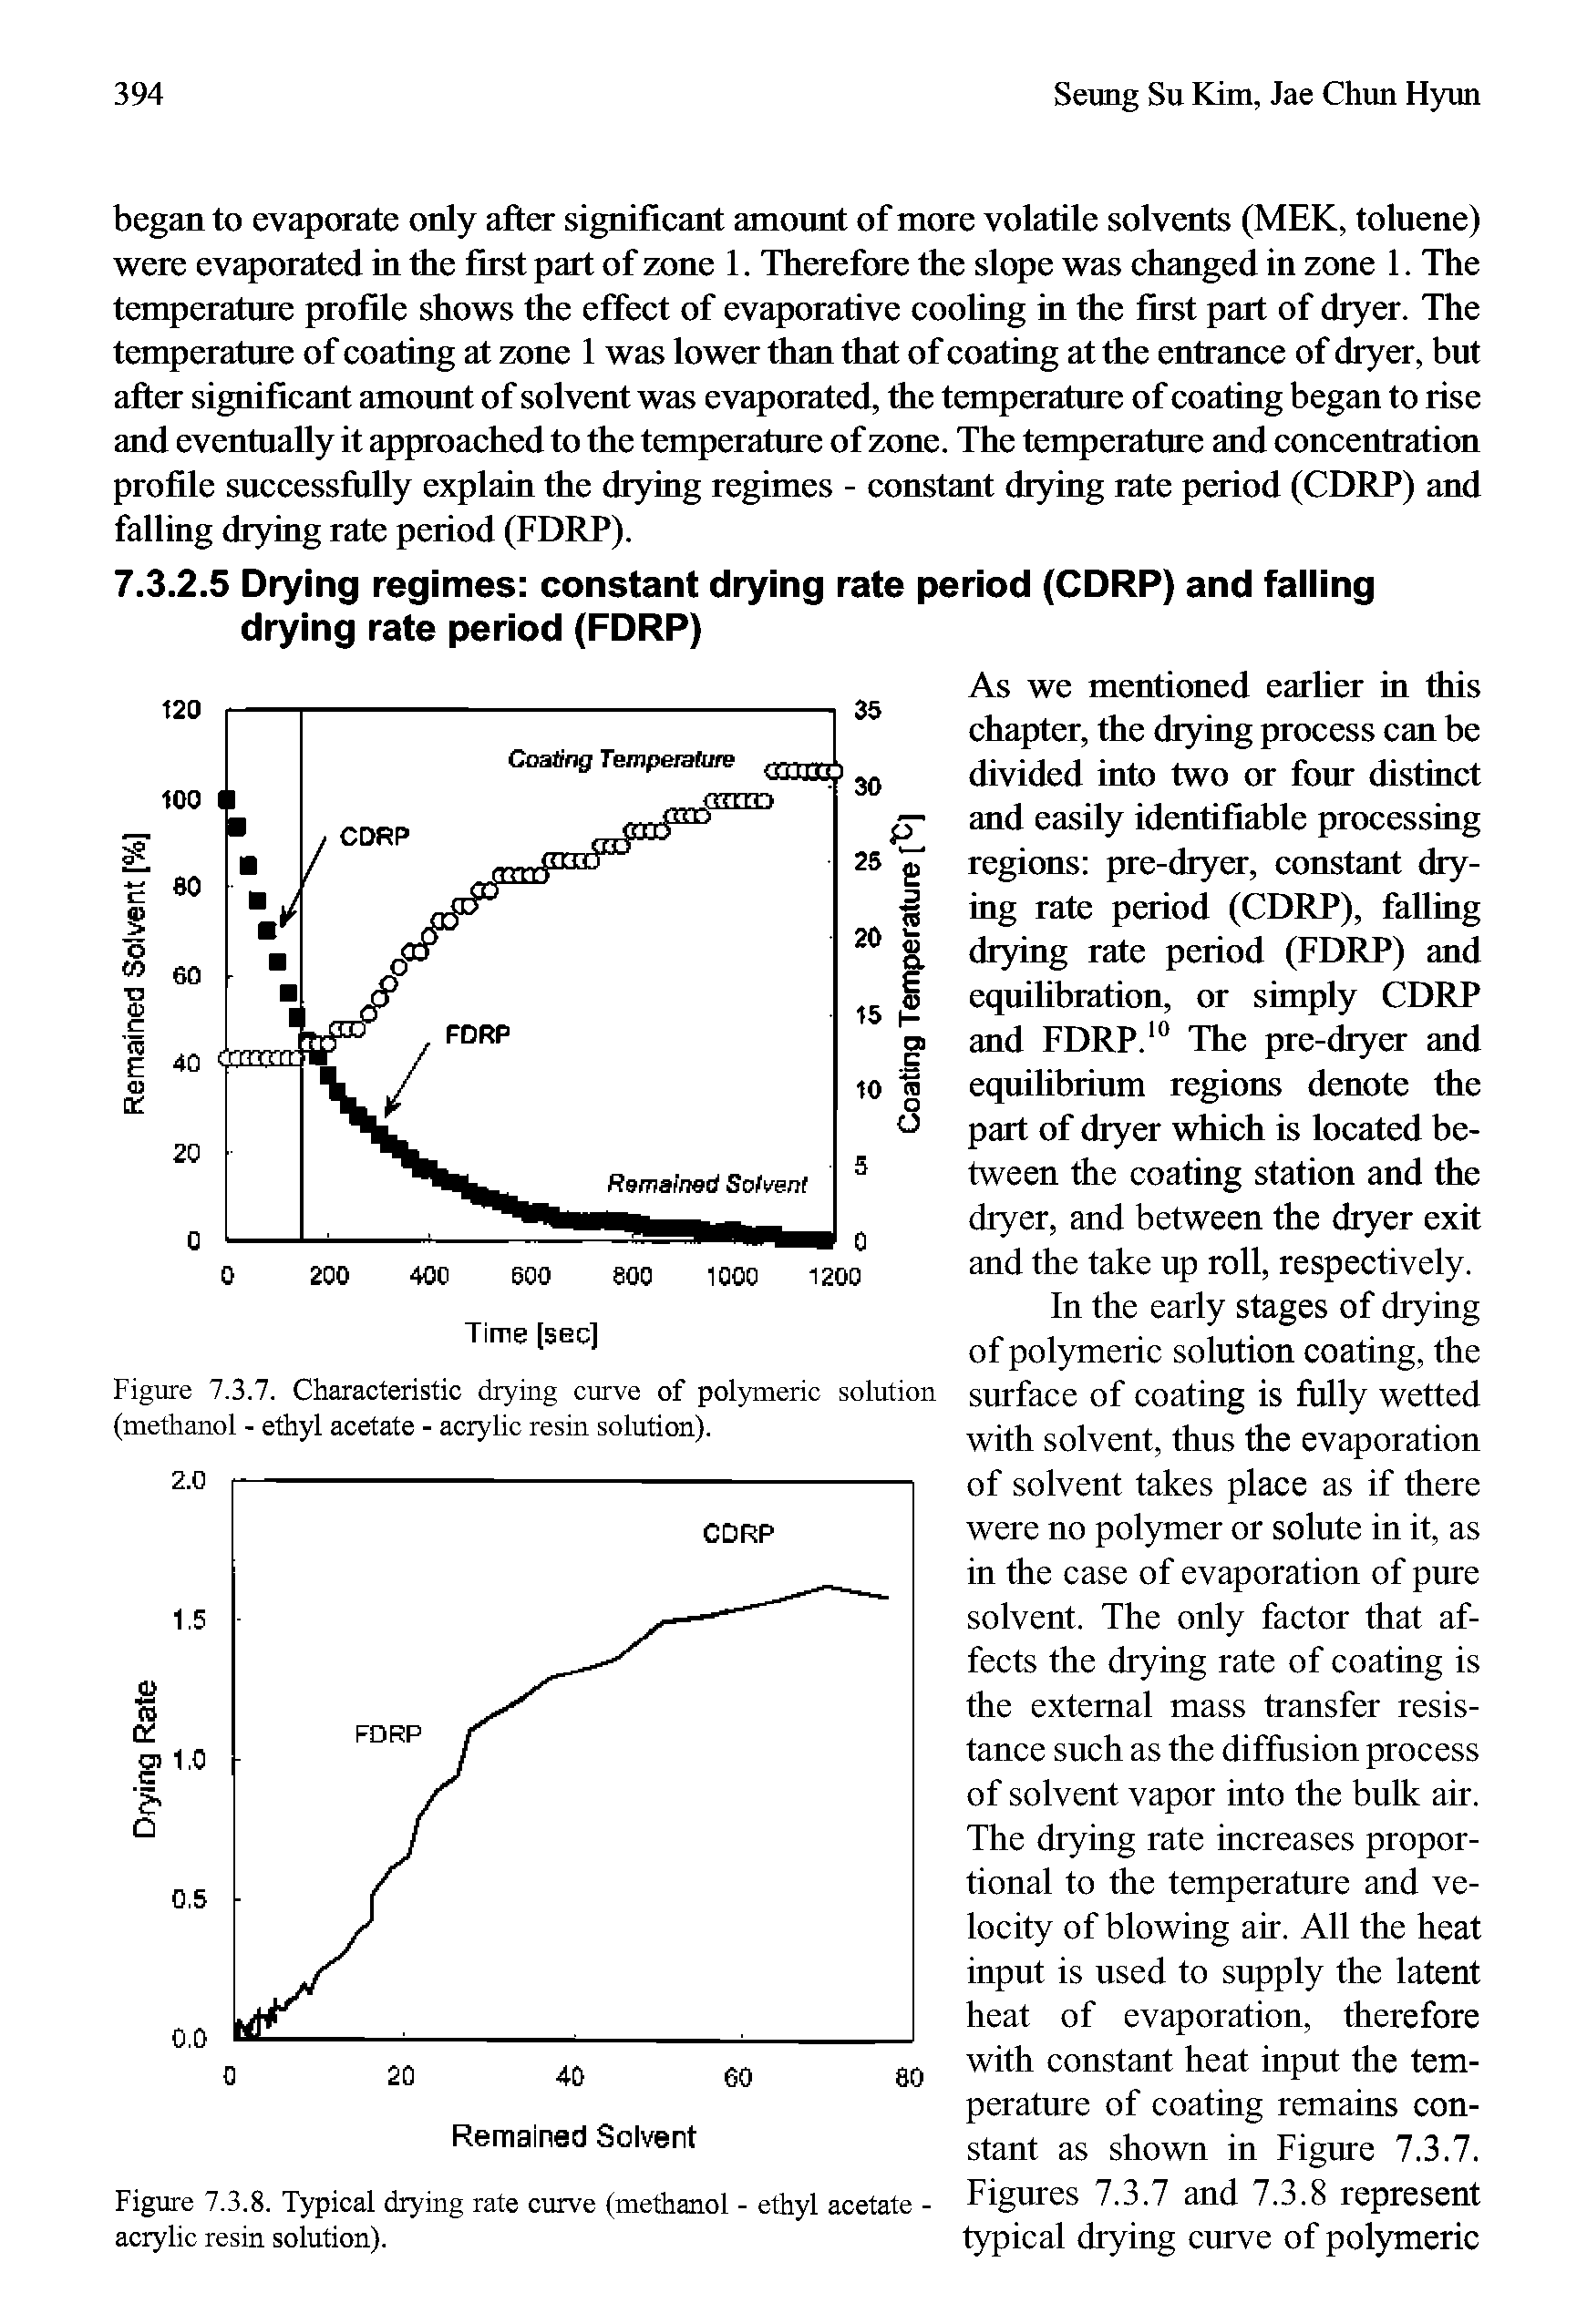 Figure 7.3.7. Characteristic drying curve of polymeric solution (methanol - ethyl acetate - acrylic resin solution).